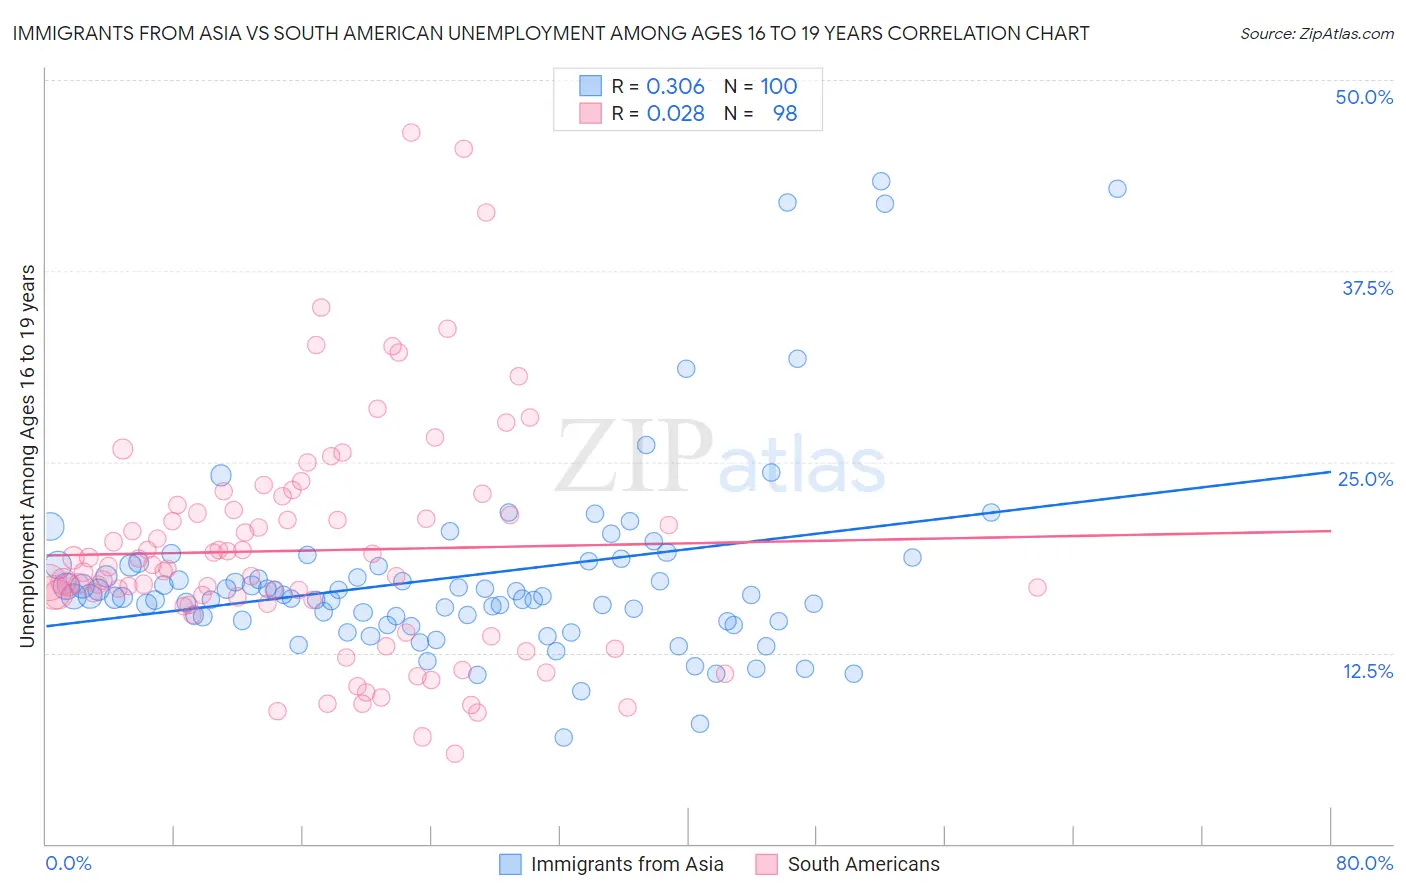 Immigrants from Asia vs South American Unemployment Among Ages 16 to 19 years